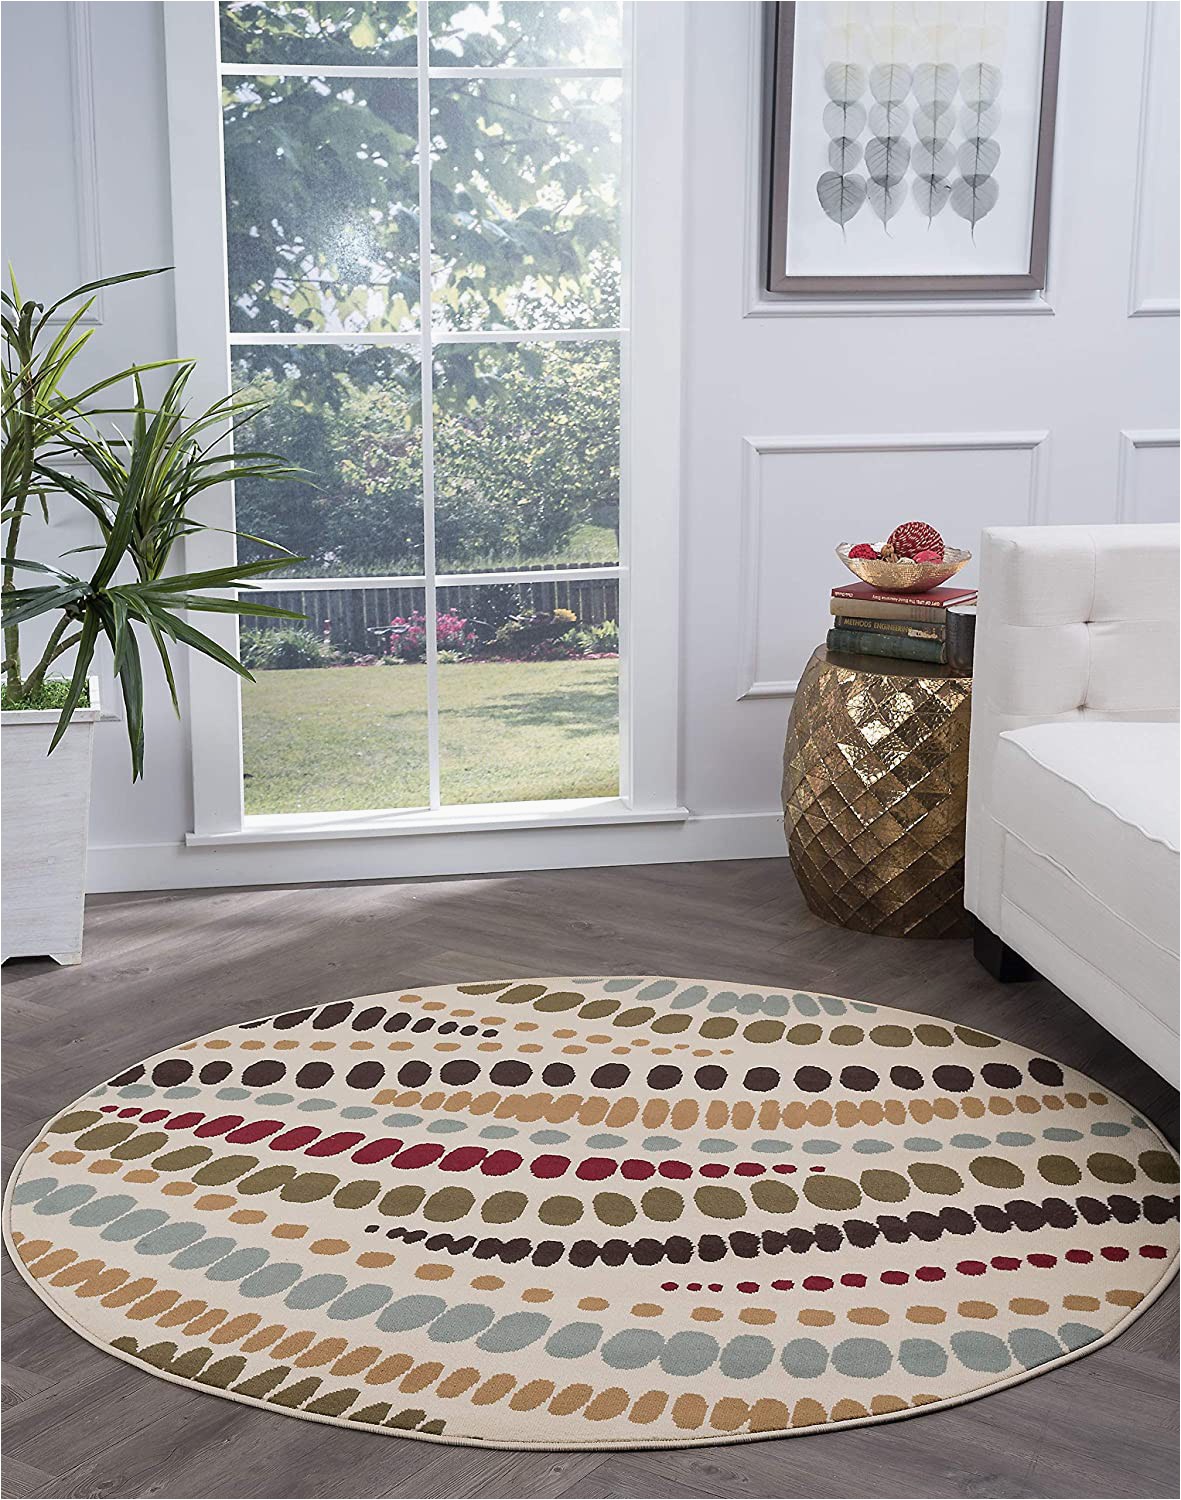 7 Feet Round area Rugs Amazon Tayse Allie Beige 8 Foot Round area Rug for